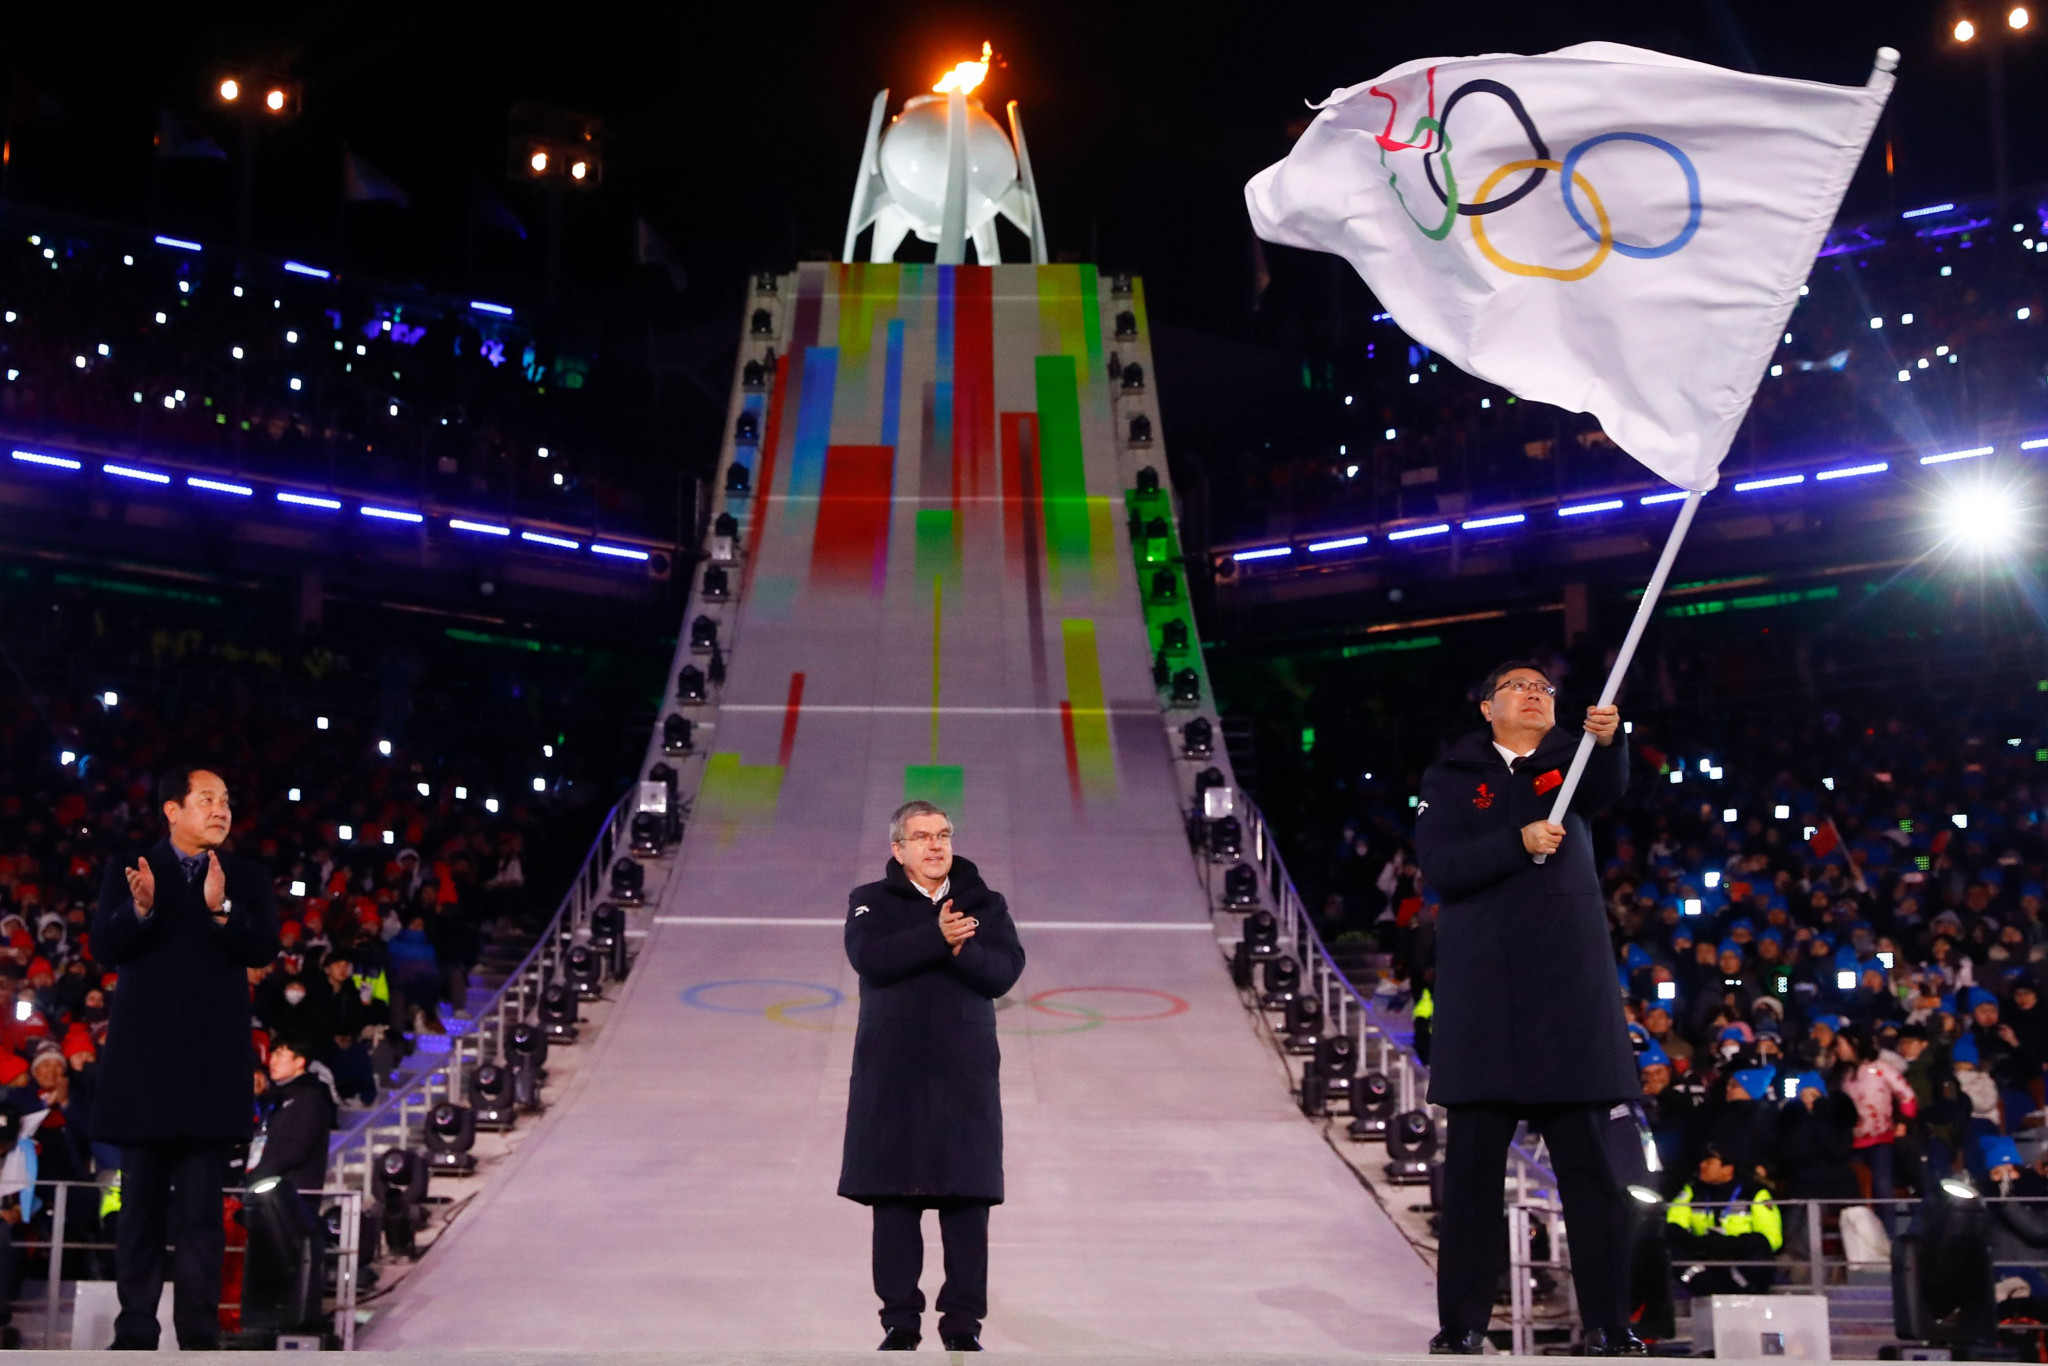 Beijing Mayor Chen Jining waves the Olympic flag during the Pyeongchang 2018 Closing Ceremony to mark the fact the Chinese city will host the 2022 Olympics as IOC President Thomas Bach watches on ©Getty Images